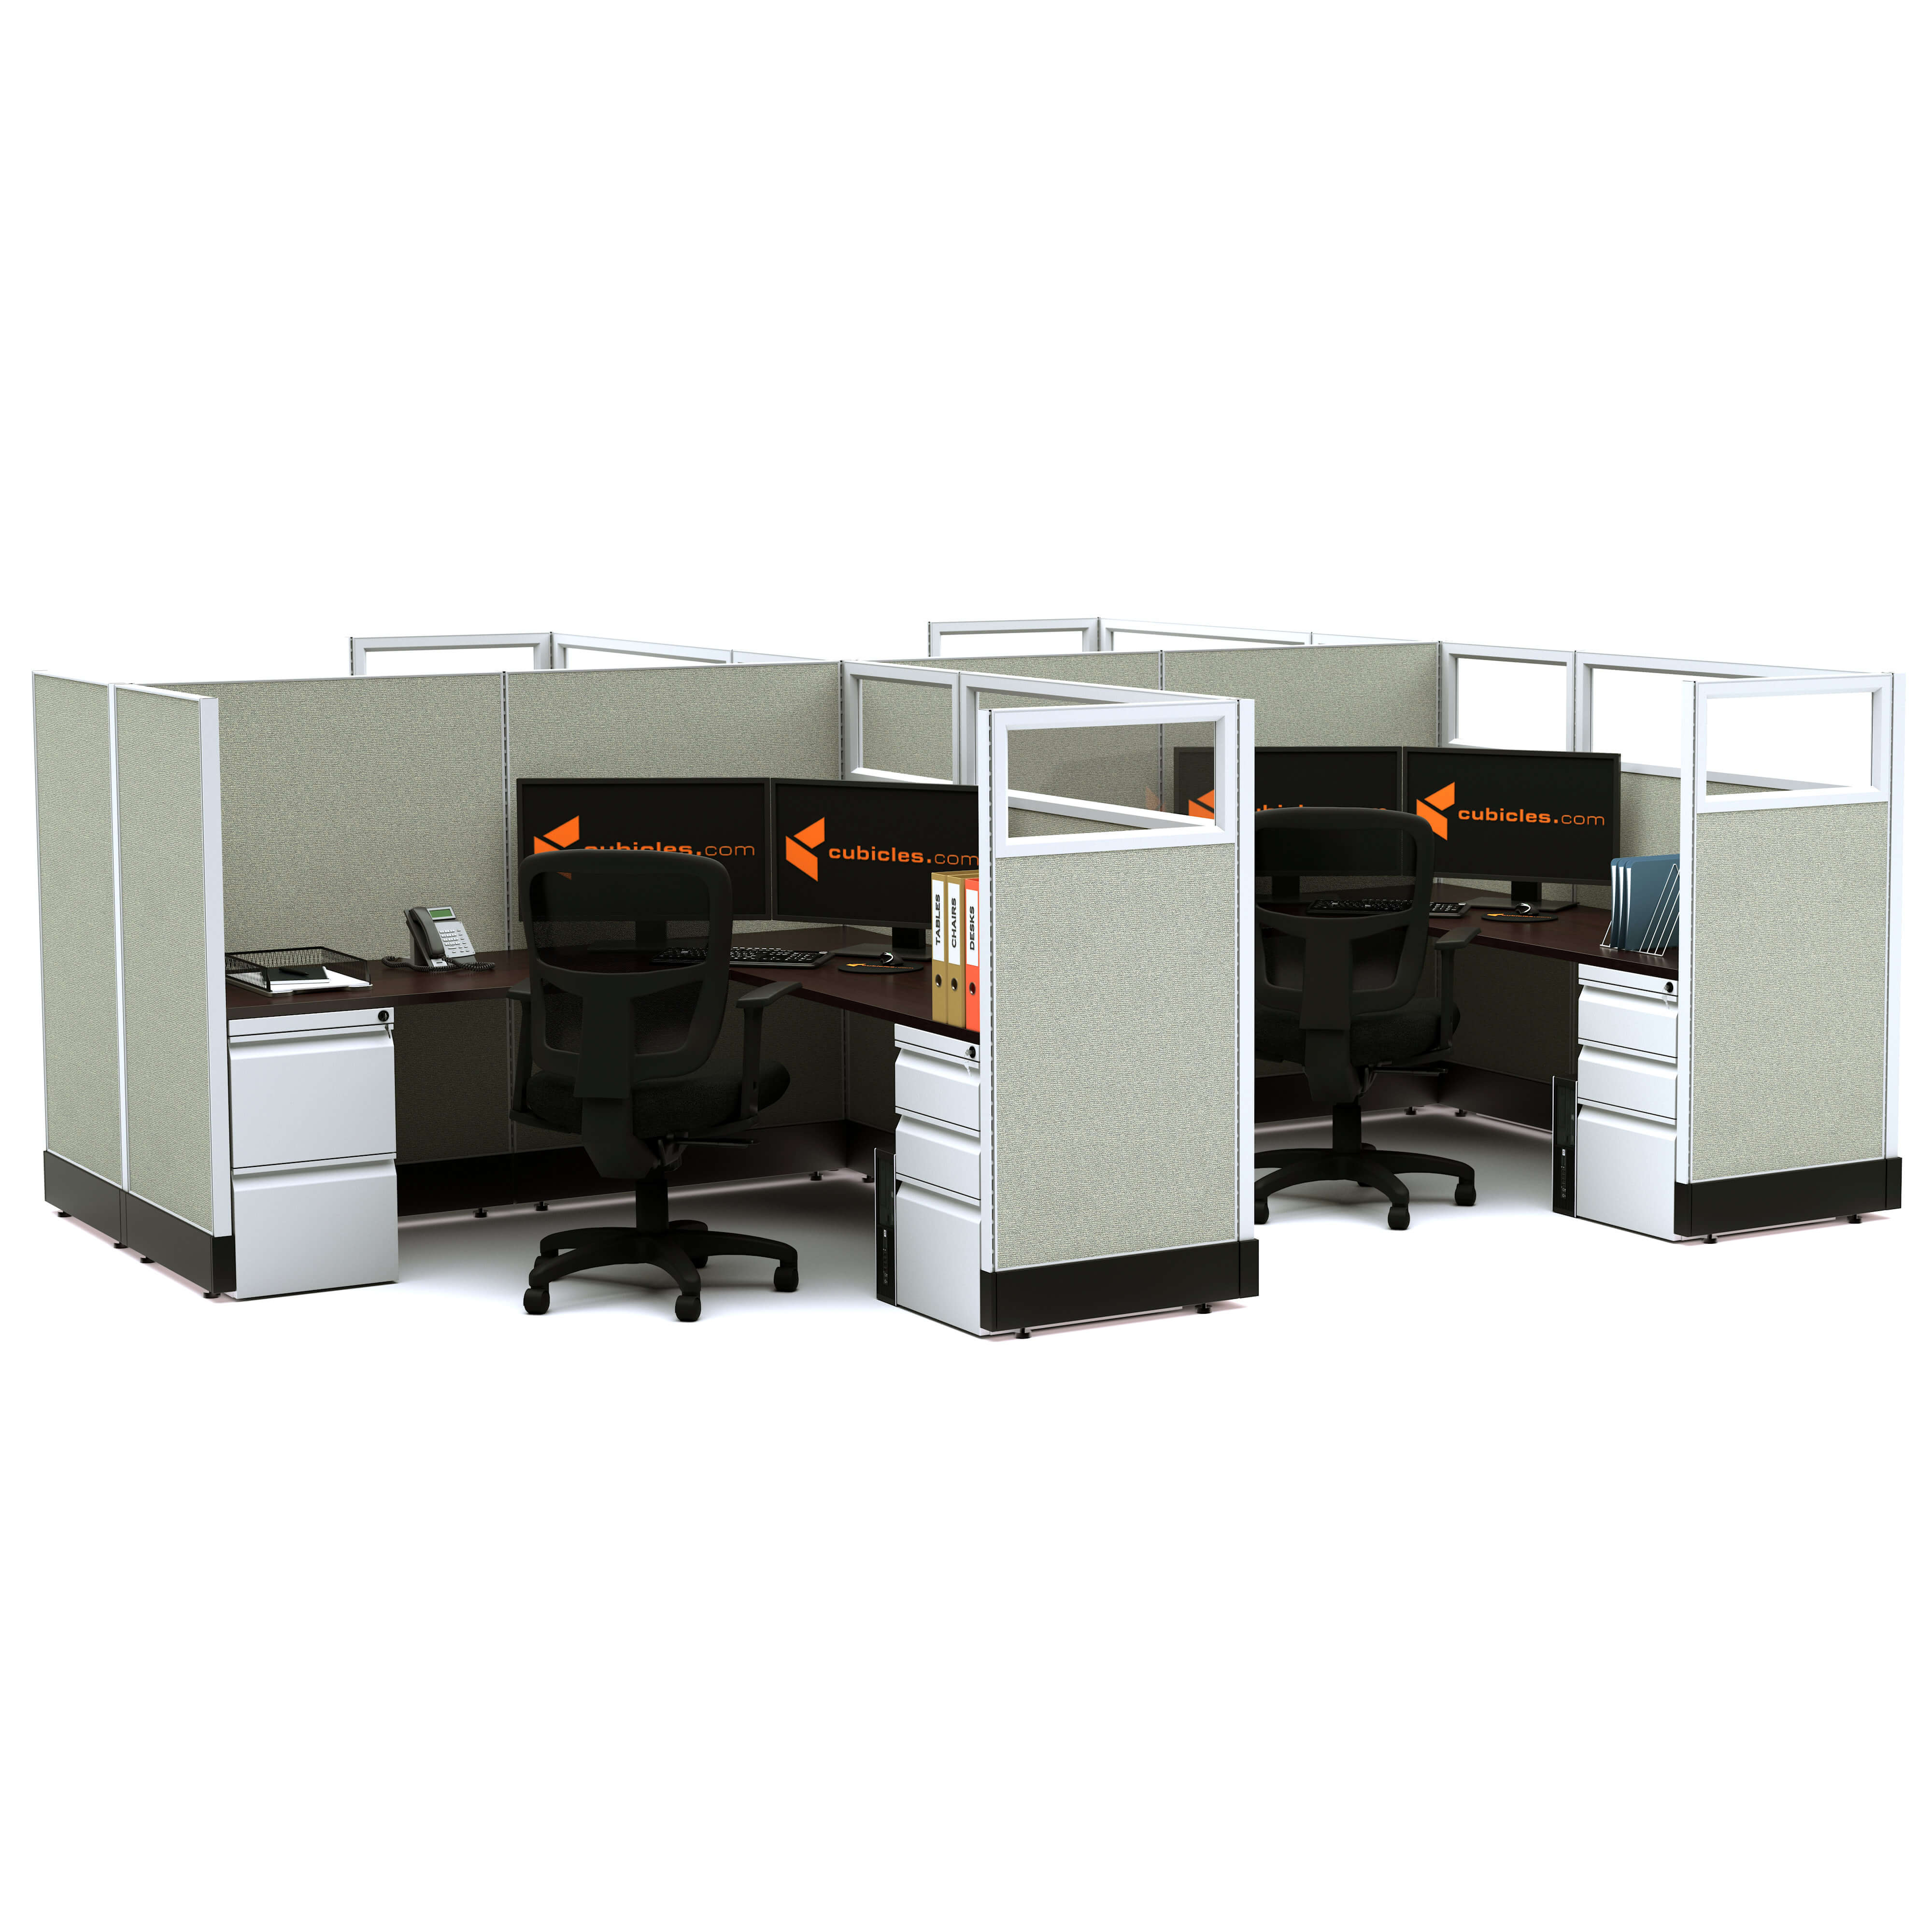 modular-office-furniture-partial-glass-office-cubicles-53h-4pack-cluster-non-powered.jpg